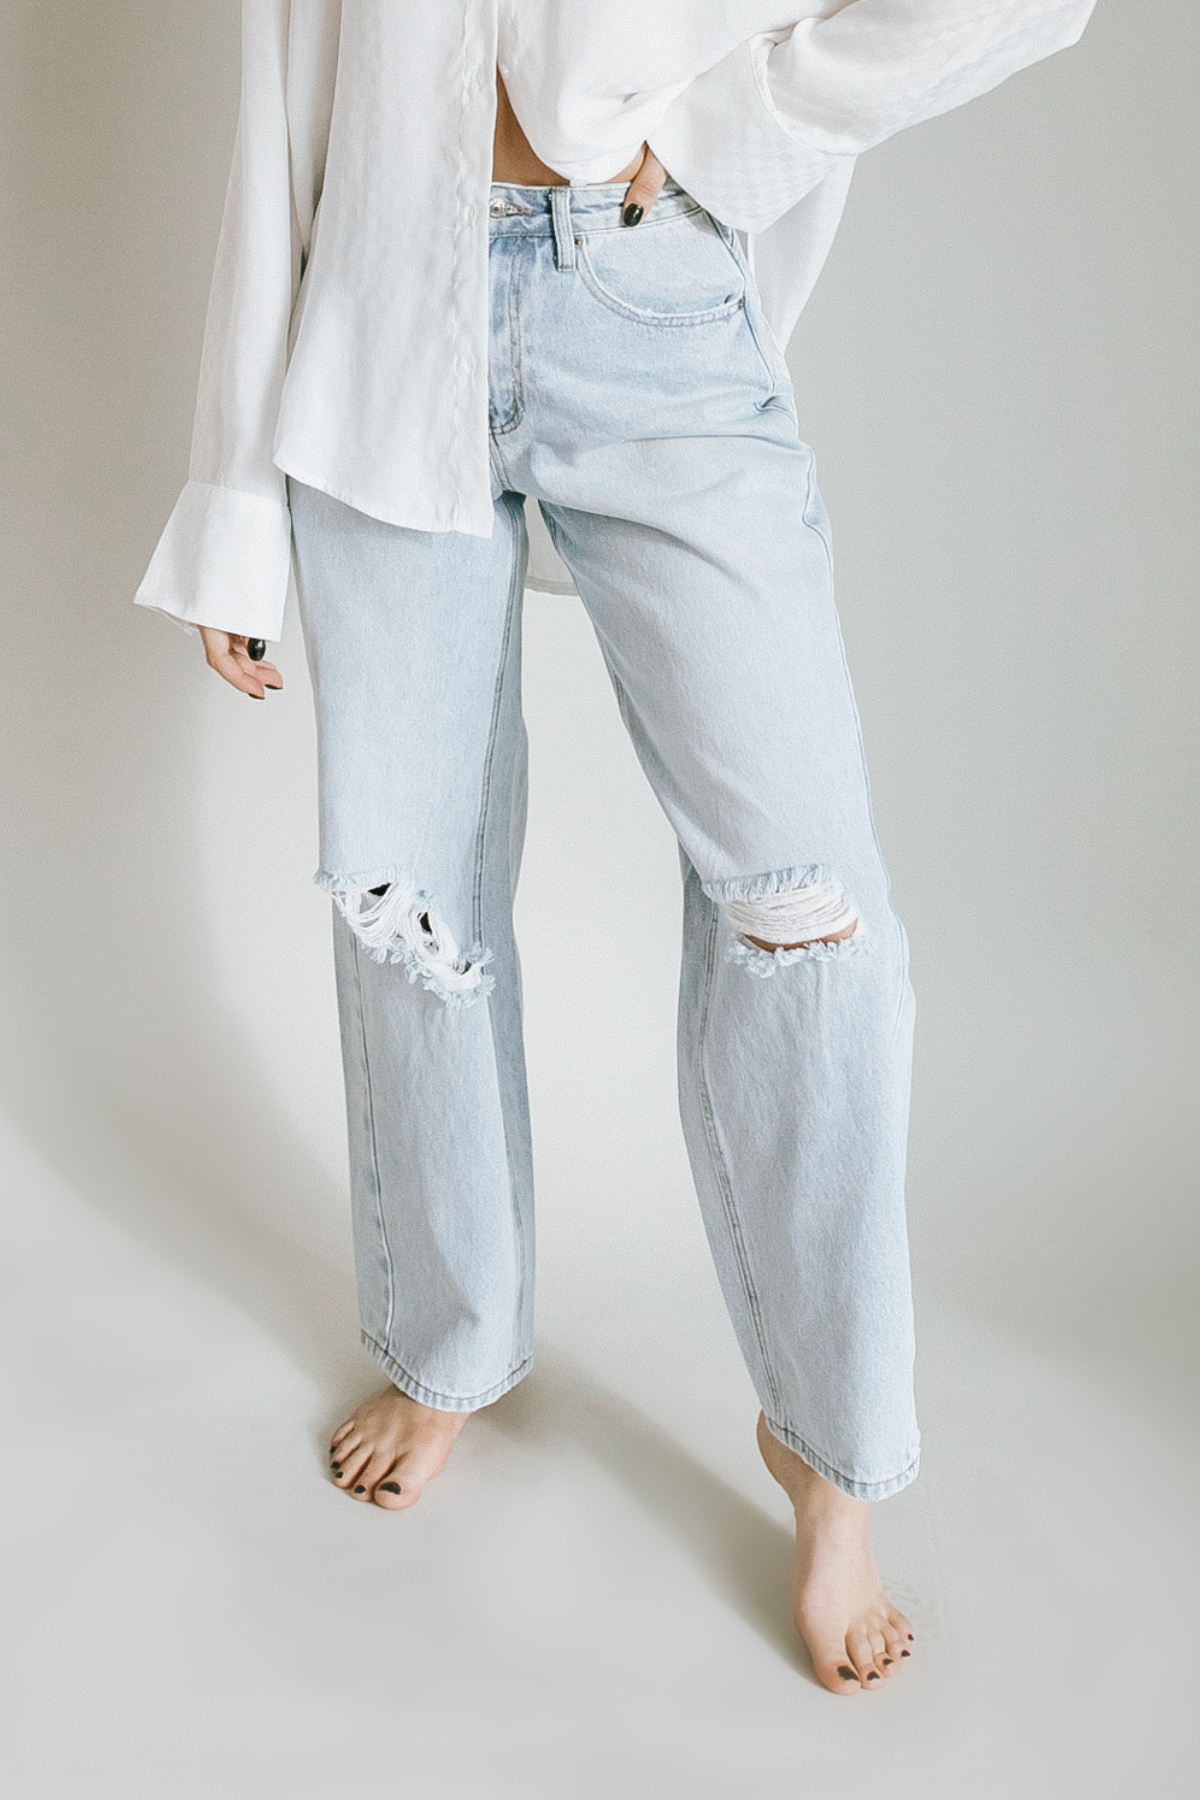 West Coast Relaxed Jean - Denim - THELIFESTYLEDCO Shop